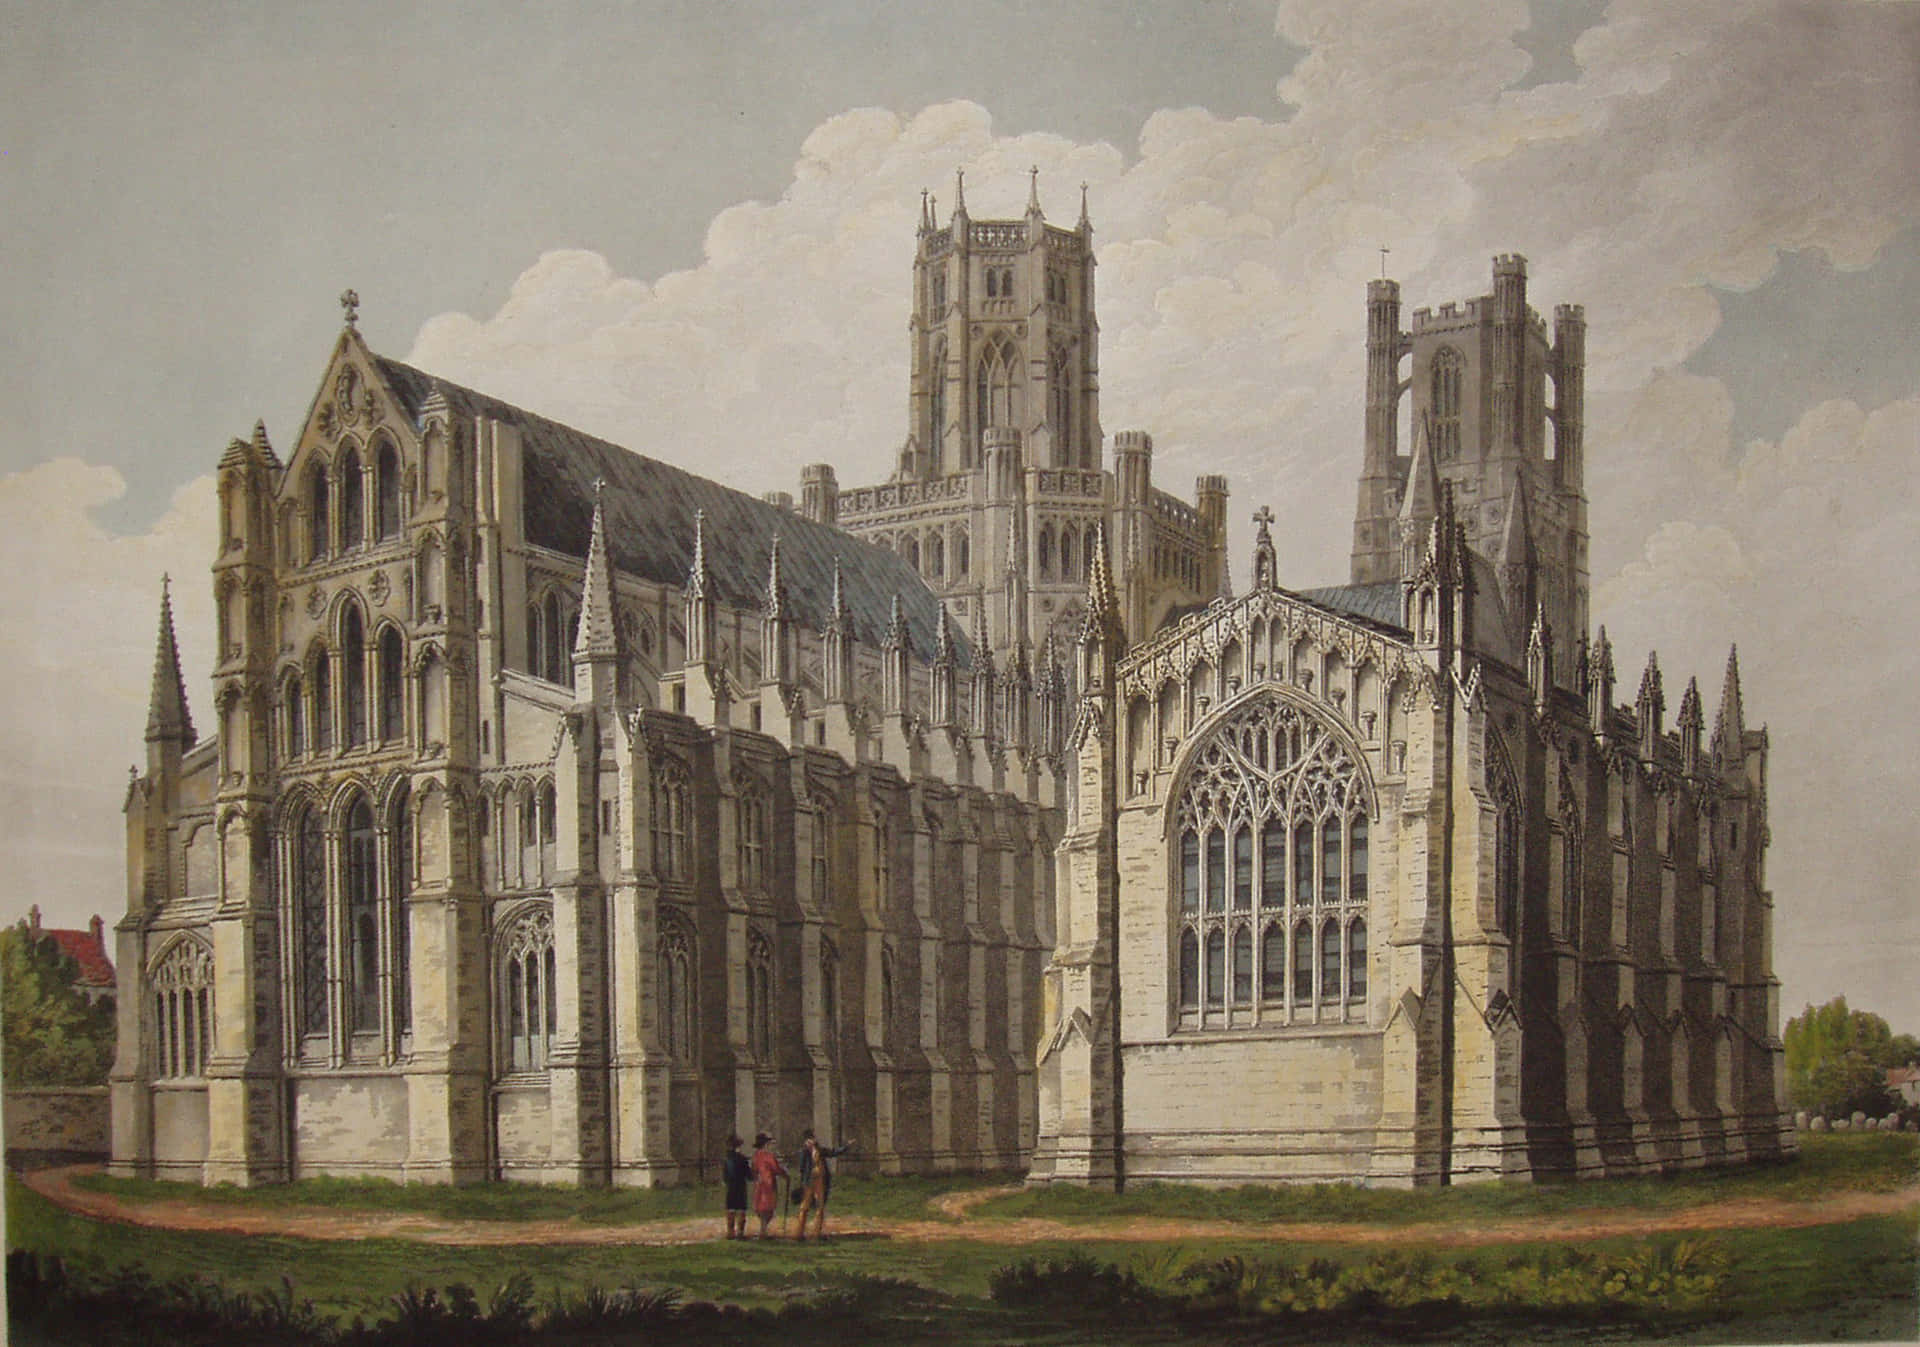 Ely Cathedral Historic Artwork Wallpaper